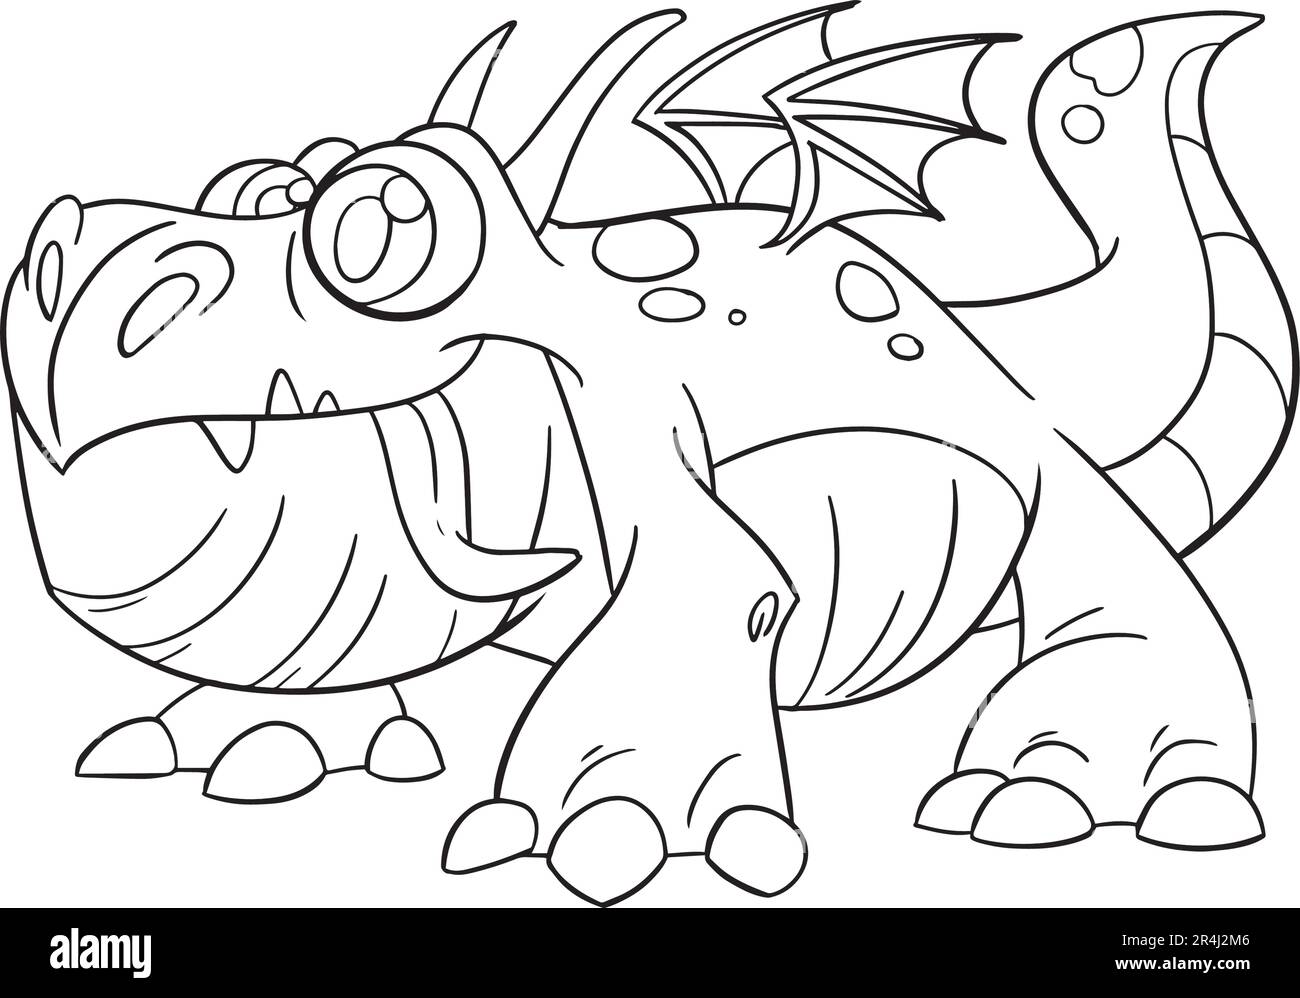 Cute Dragon Character For Coloring Page, Creative Coloring Experiences with Dragon Pages. Stock Vector